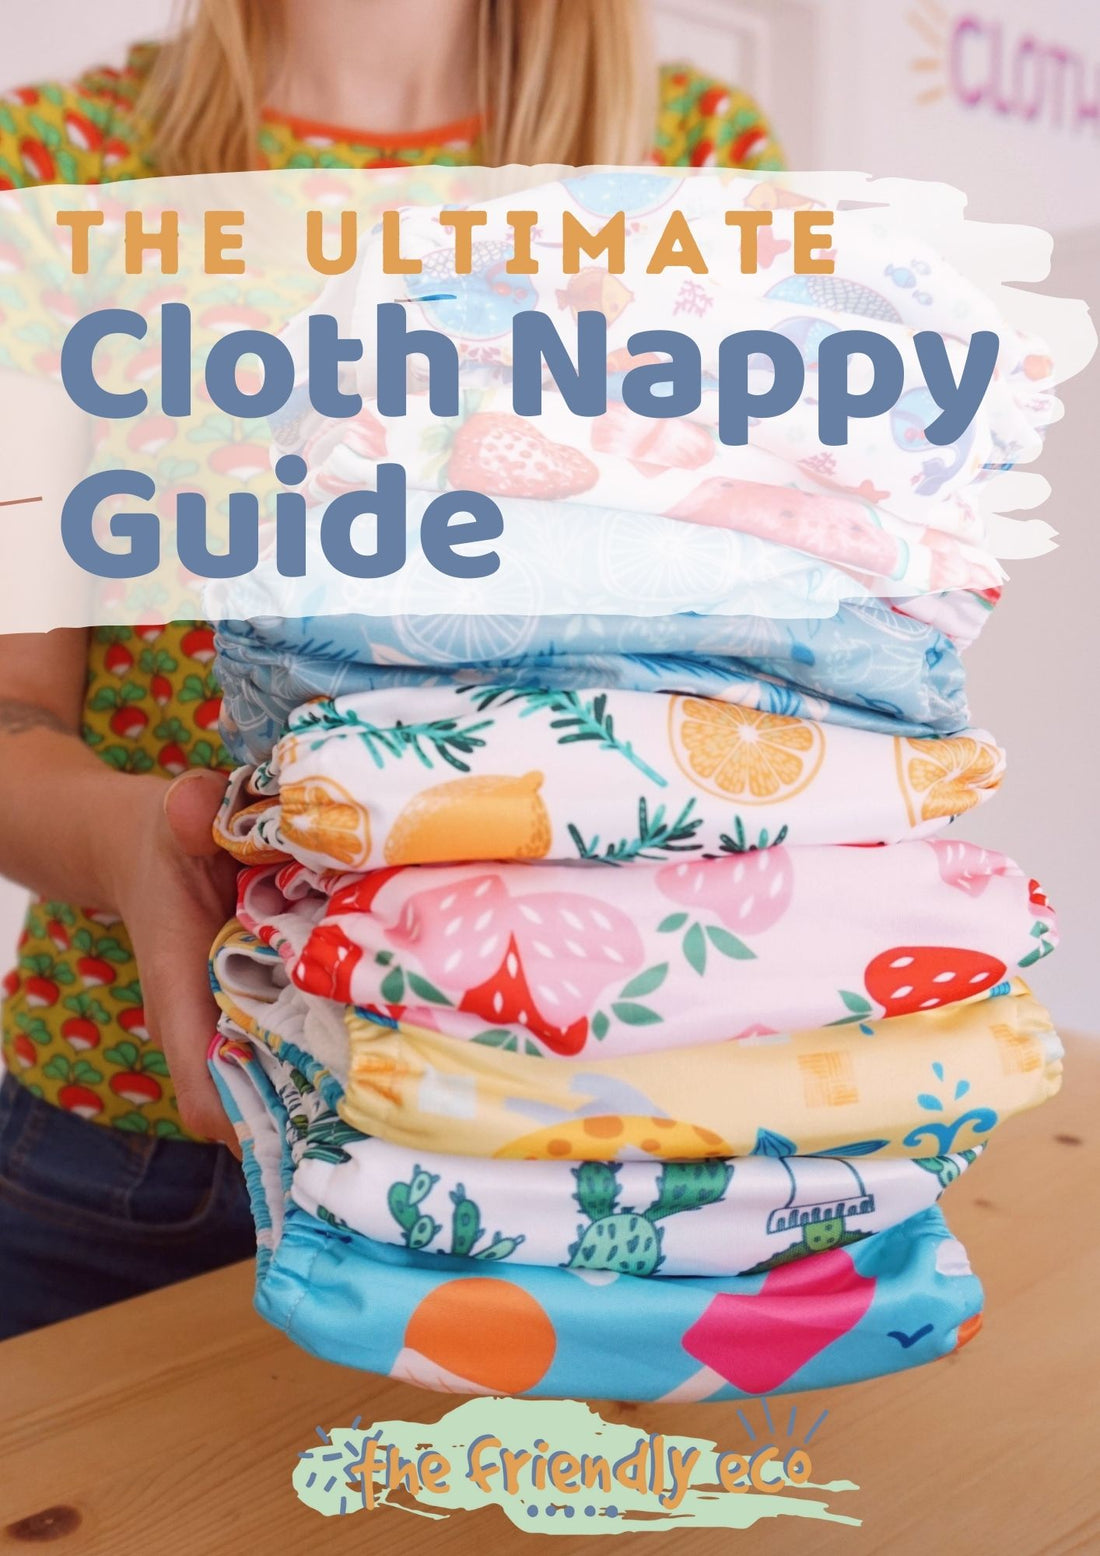 How To Use Reusable Nappies - Our Top Ten Tips